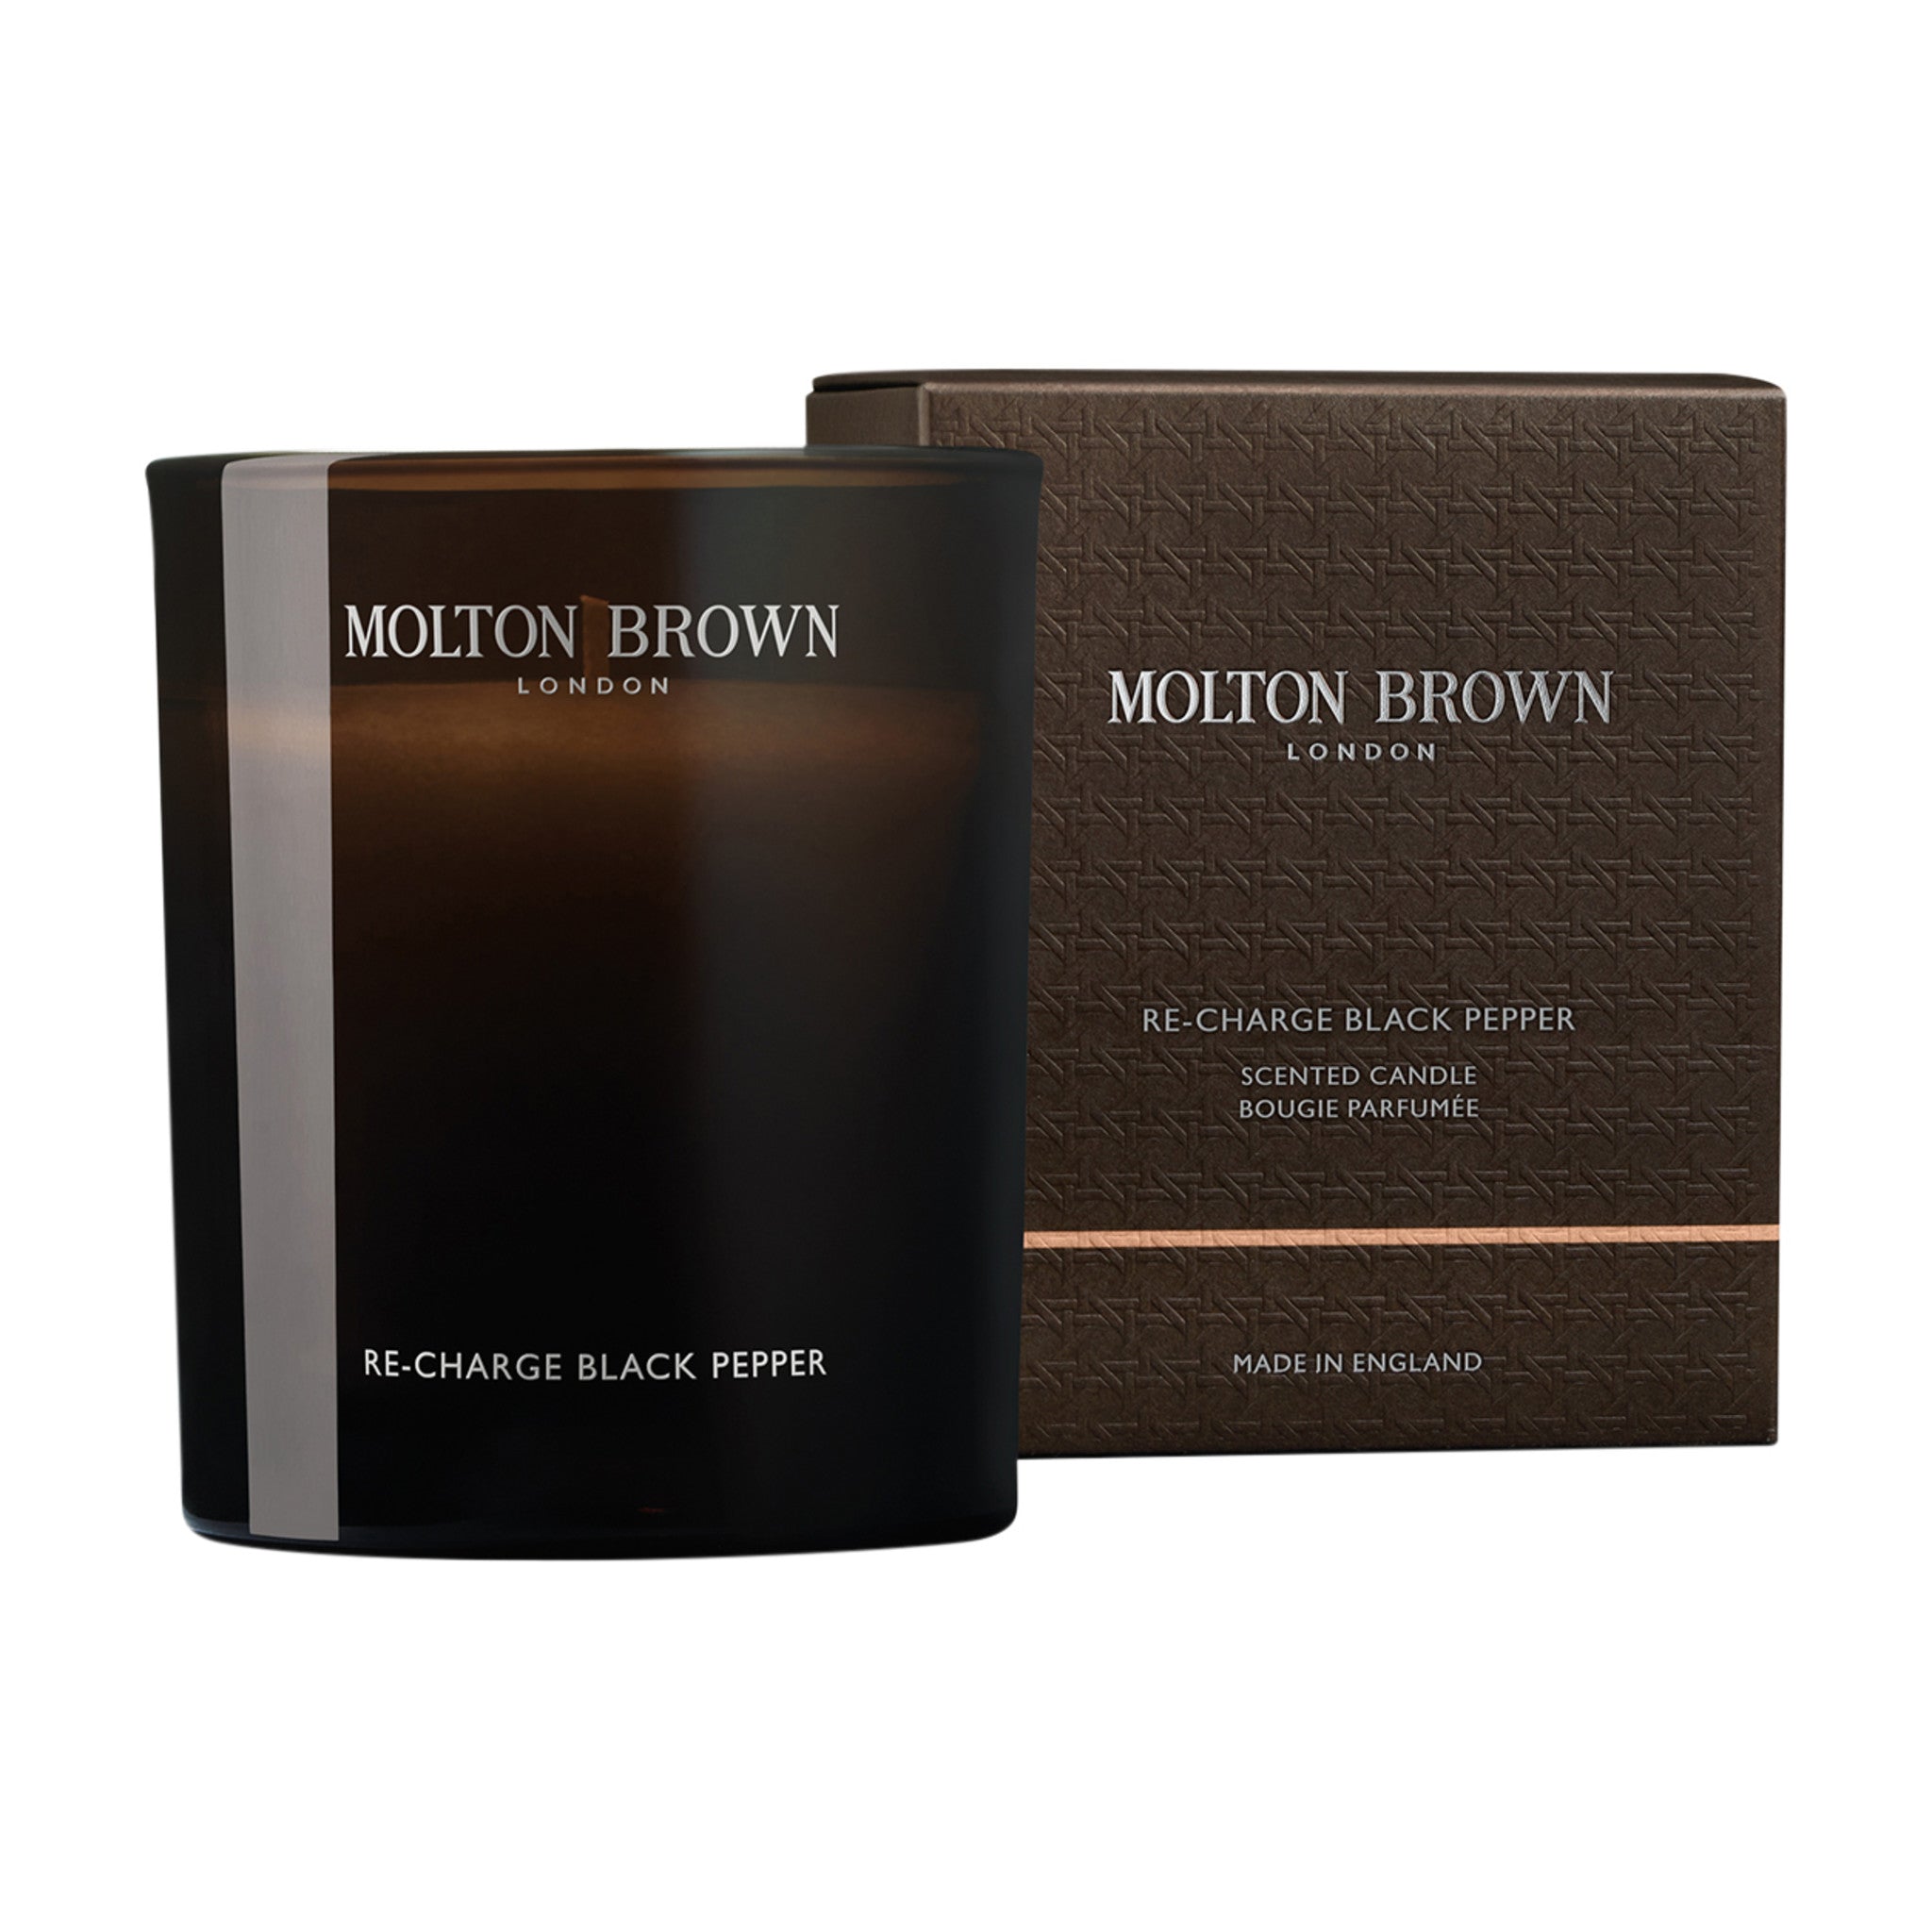 Molton Brown Re-Charge Black Pepper Candle Size variant: 6.7 oz (Signature) main image.